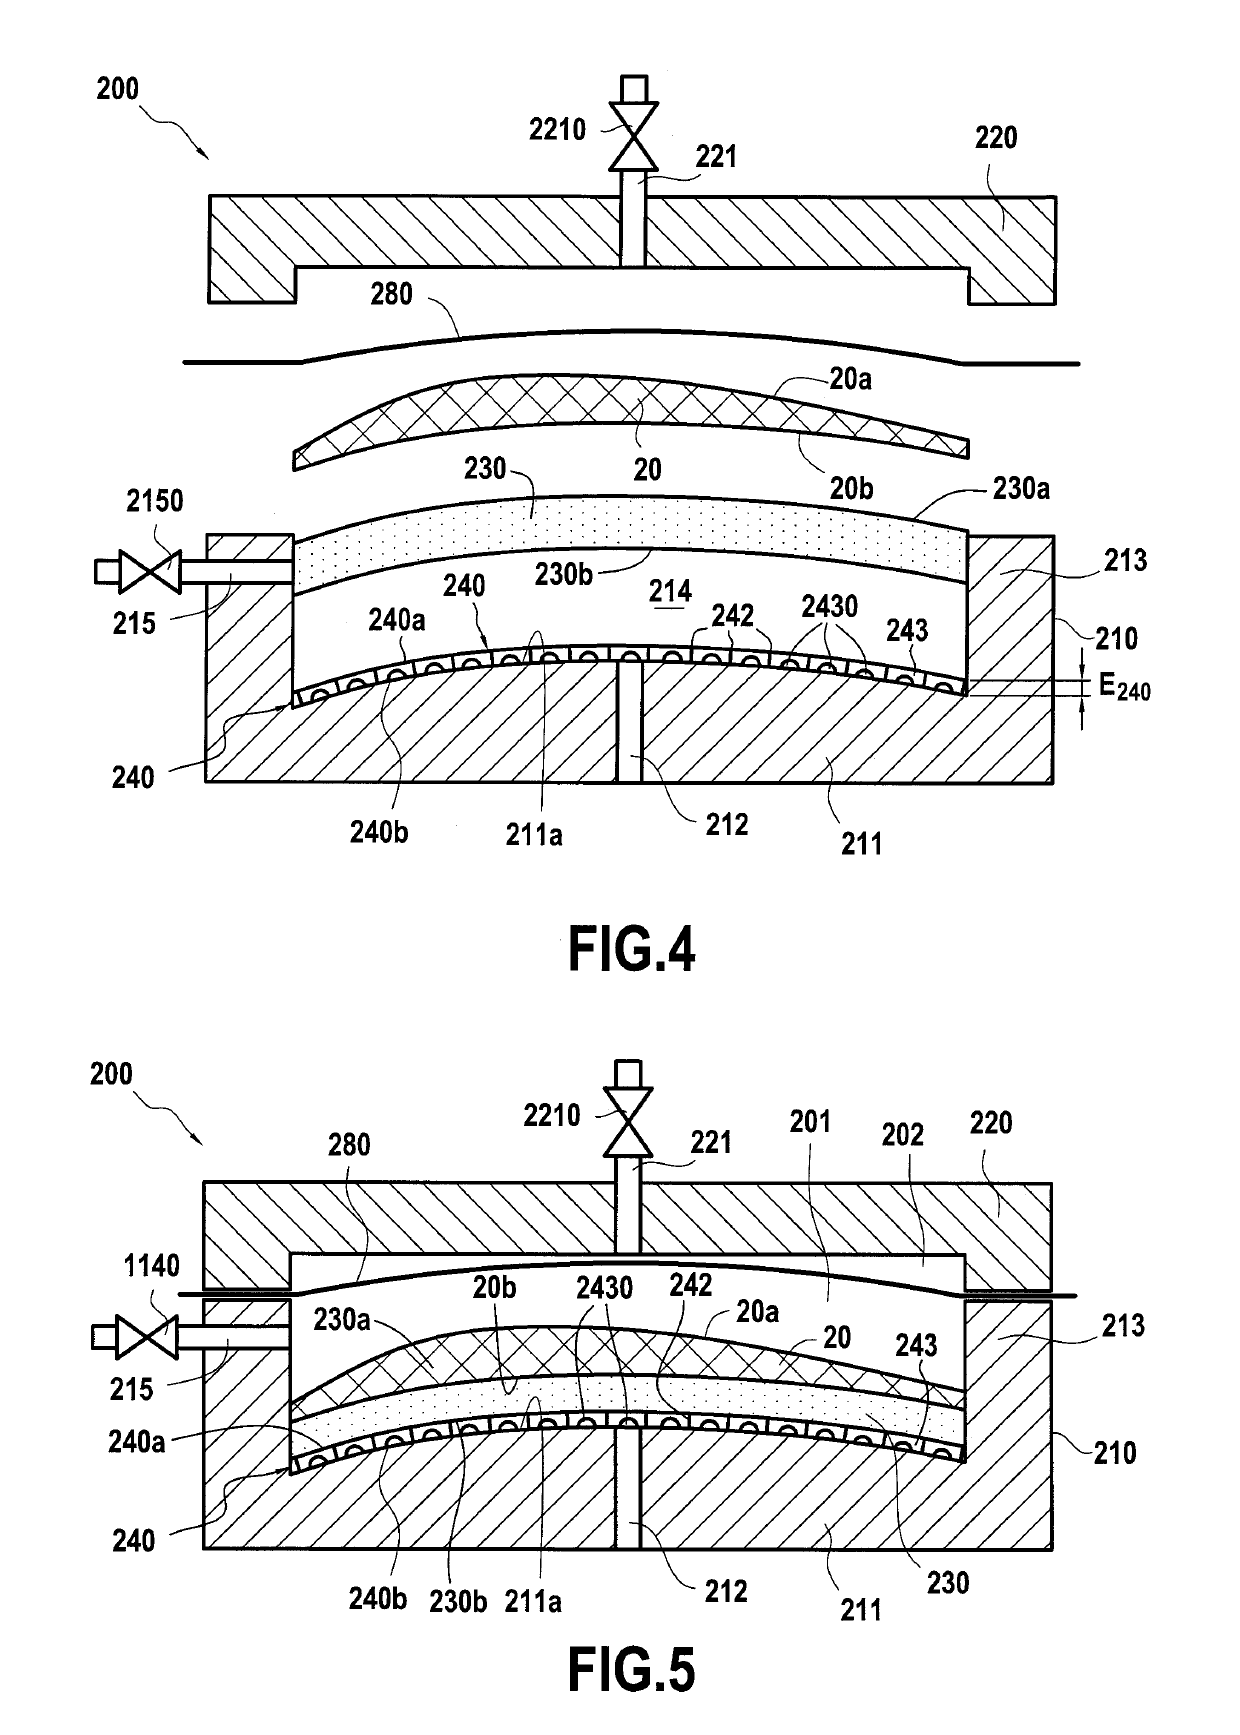 A method of fabricating a composite material part by injecting a filled slurry into a fiber texture